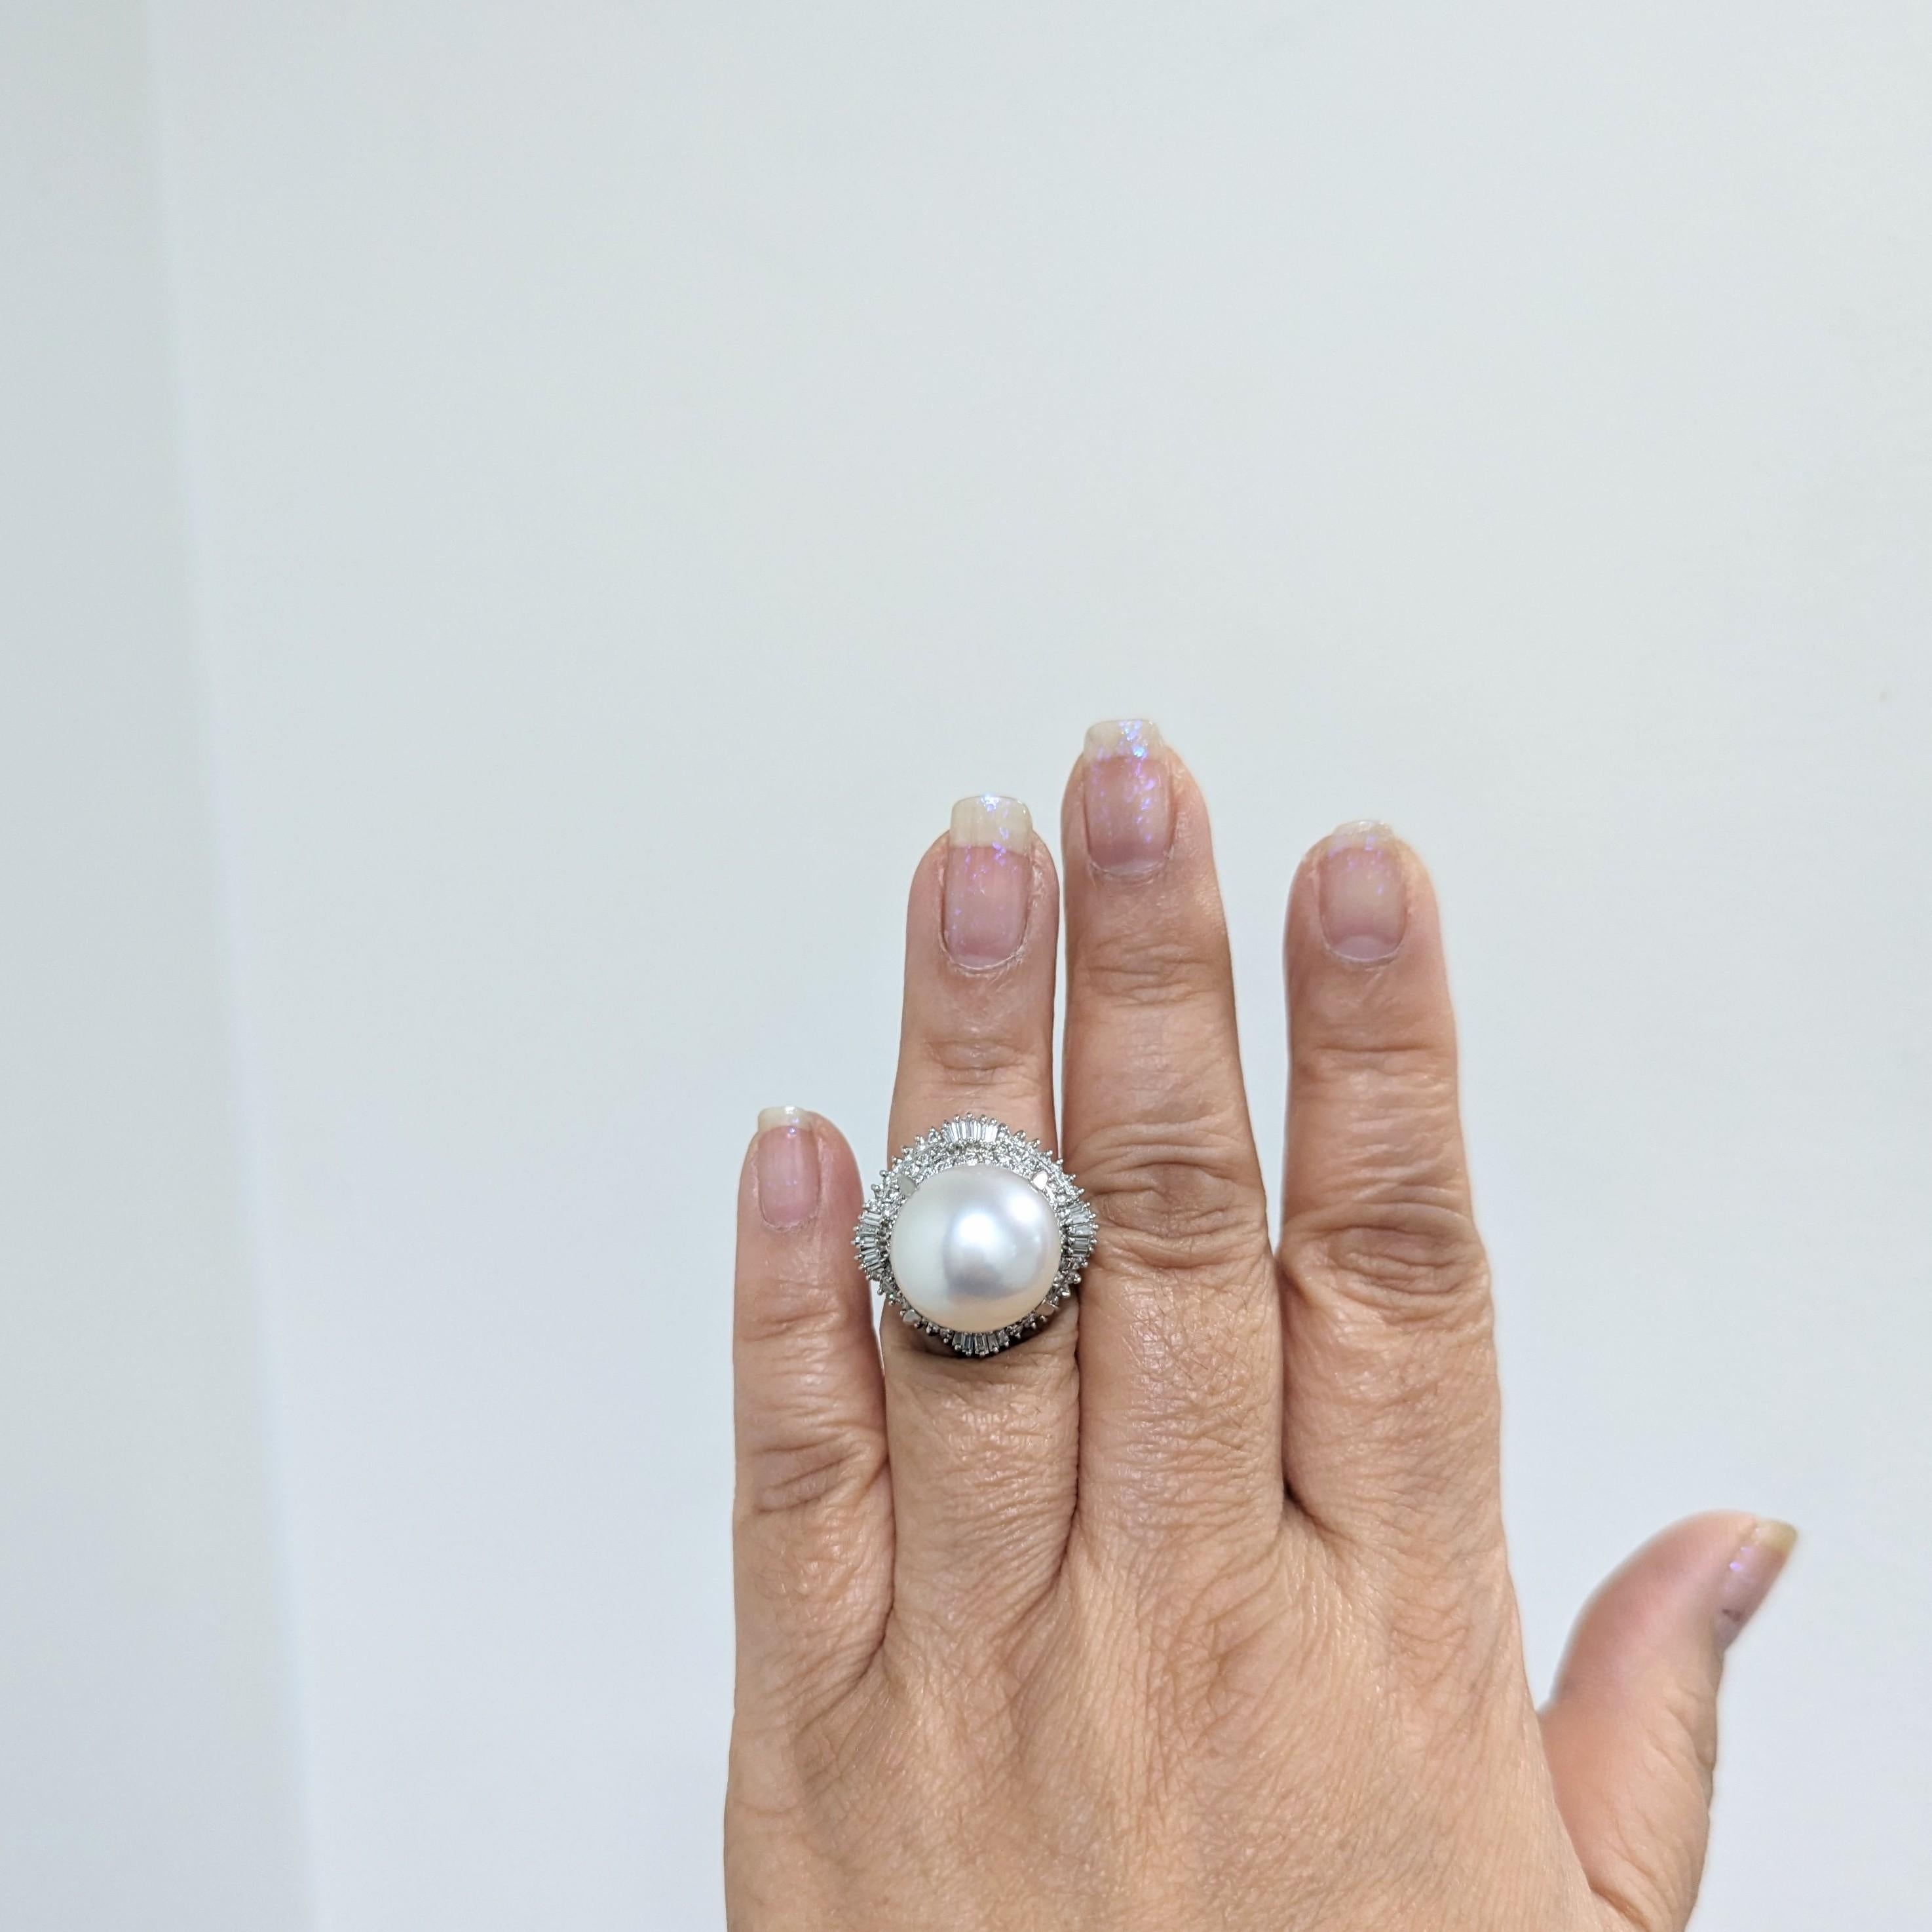 Large 15.4 mm white South Sea white pearl with 1.22 ct. good quality white diamond rounds and baguettes.  Handmade in platinum.  Ring size 6.